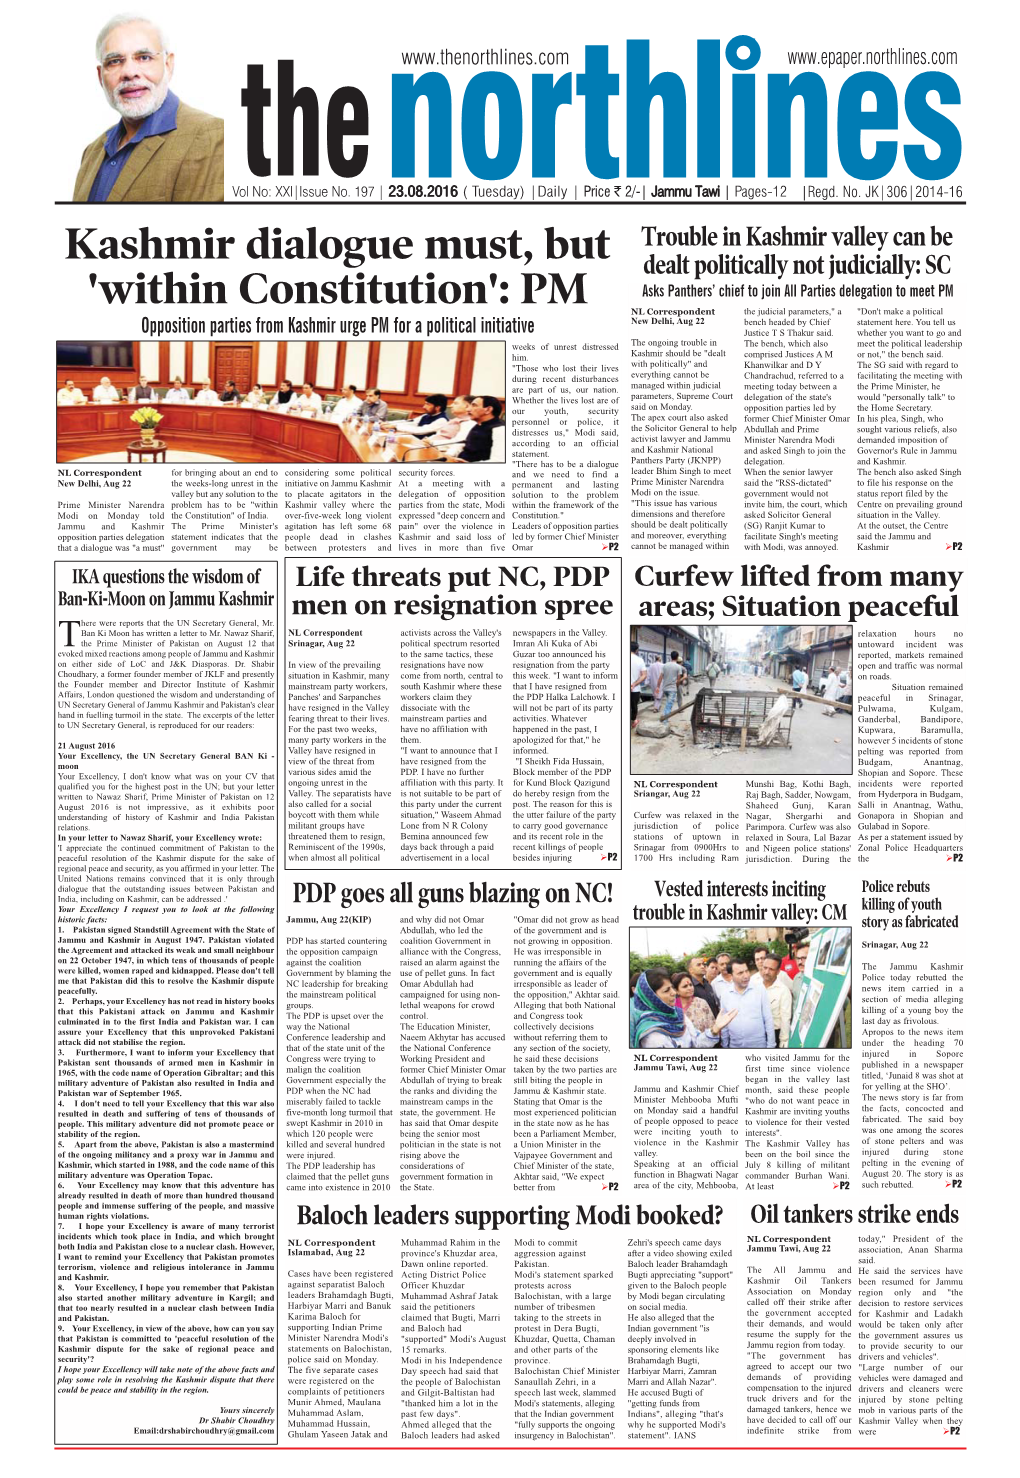 Kashmir Dialogue Must, but 'Within Constitution': PM